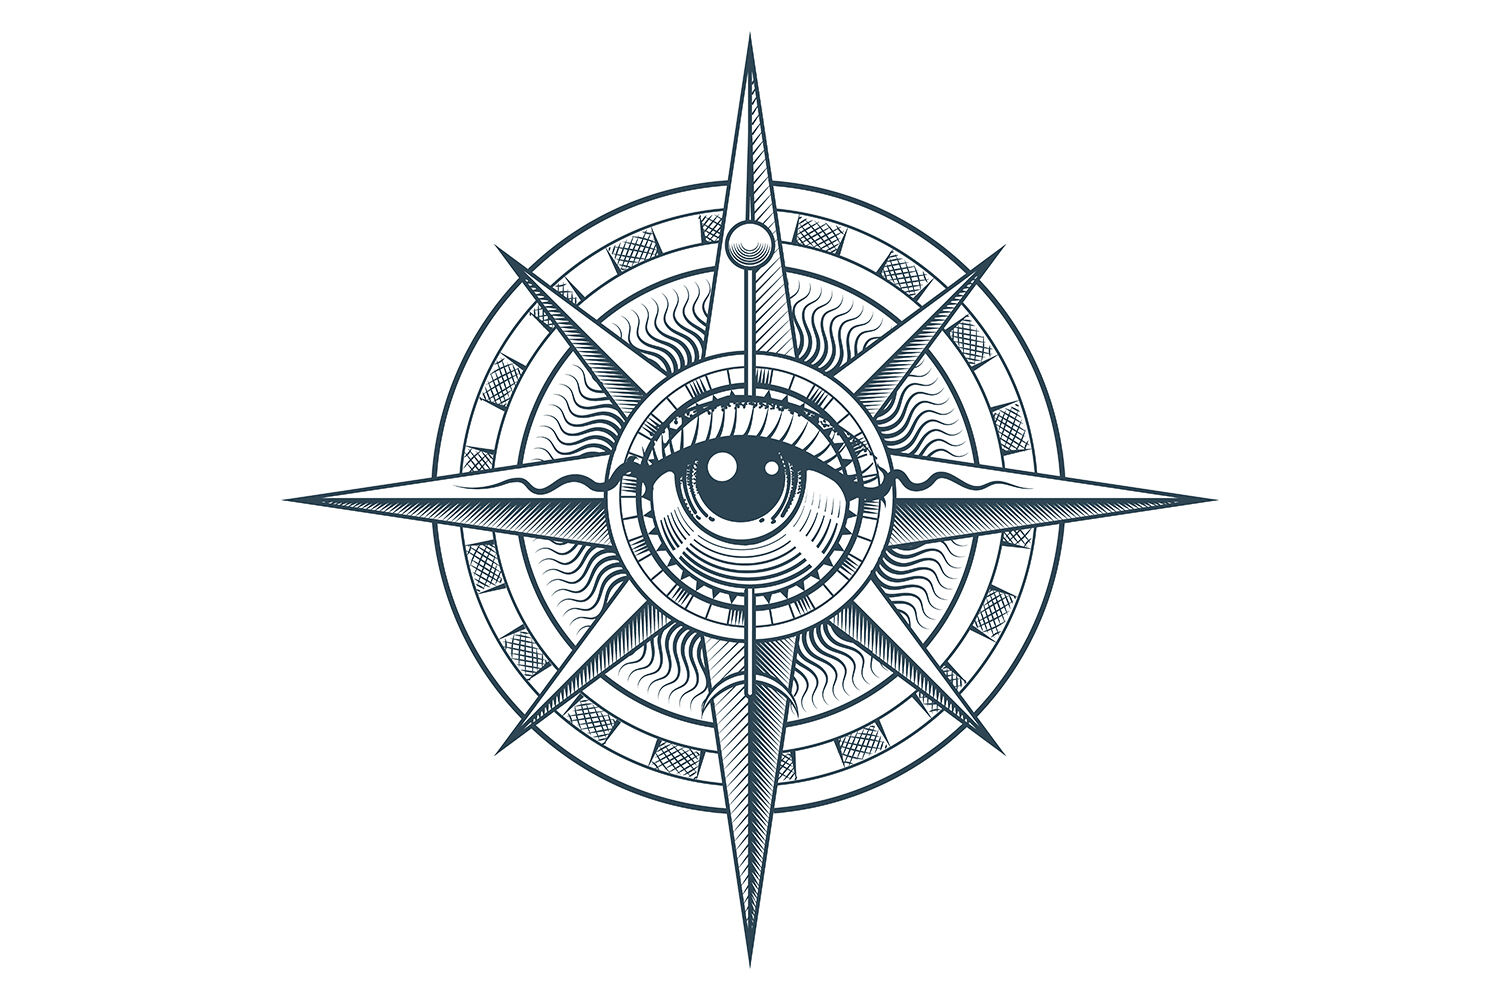 Lexica - Design an elegant compass rose tattoo, with ornate directions and  nautical elements to symbolize guidance, exploration, and the journey of  l...